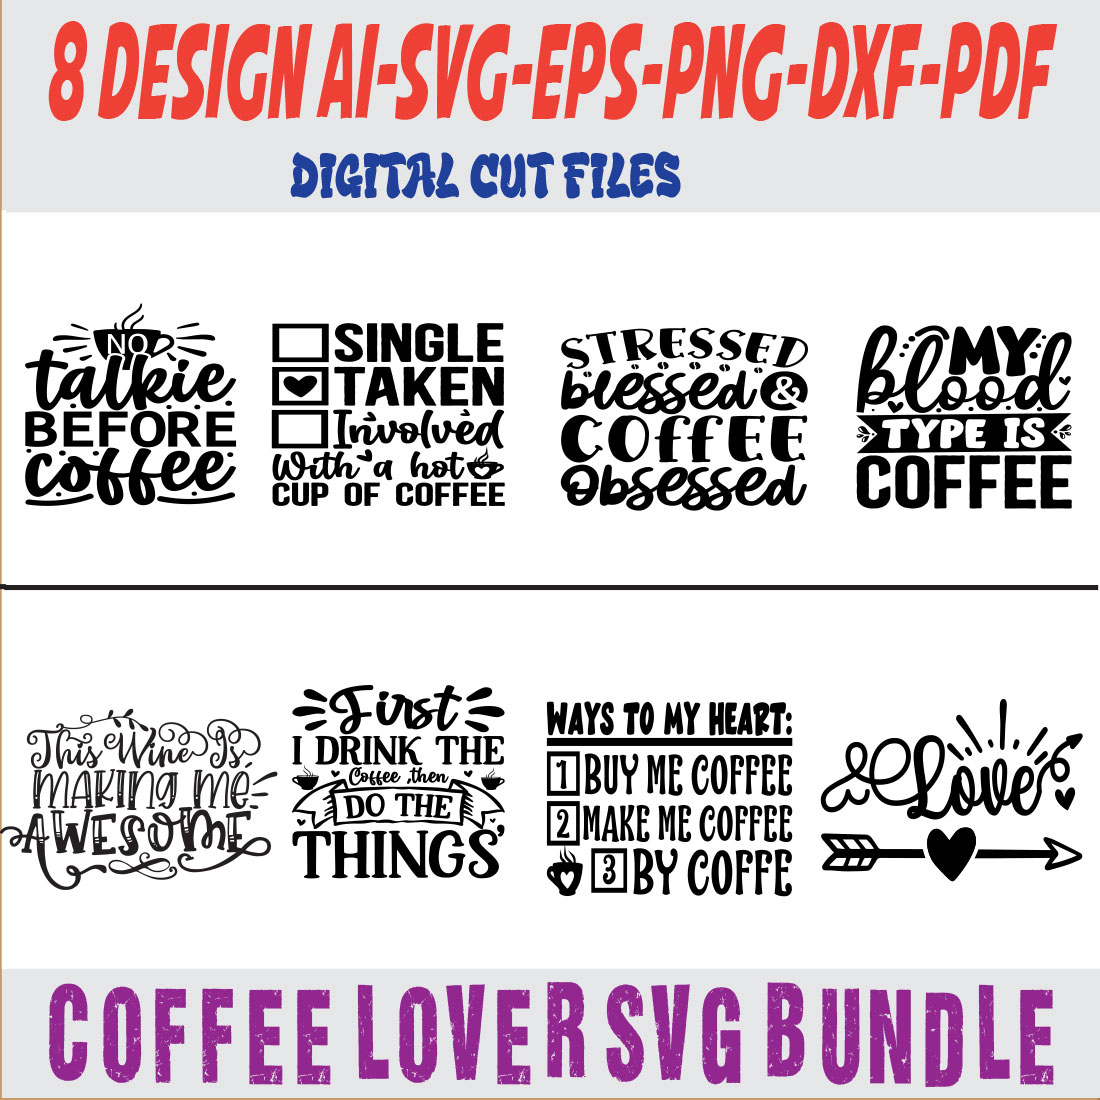 Coffee Lover SVG Bundle cover image.